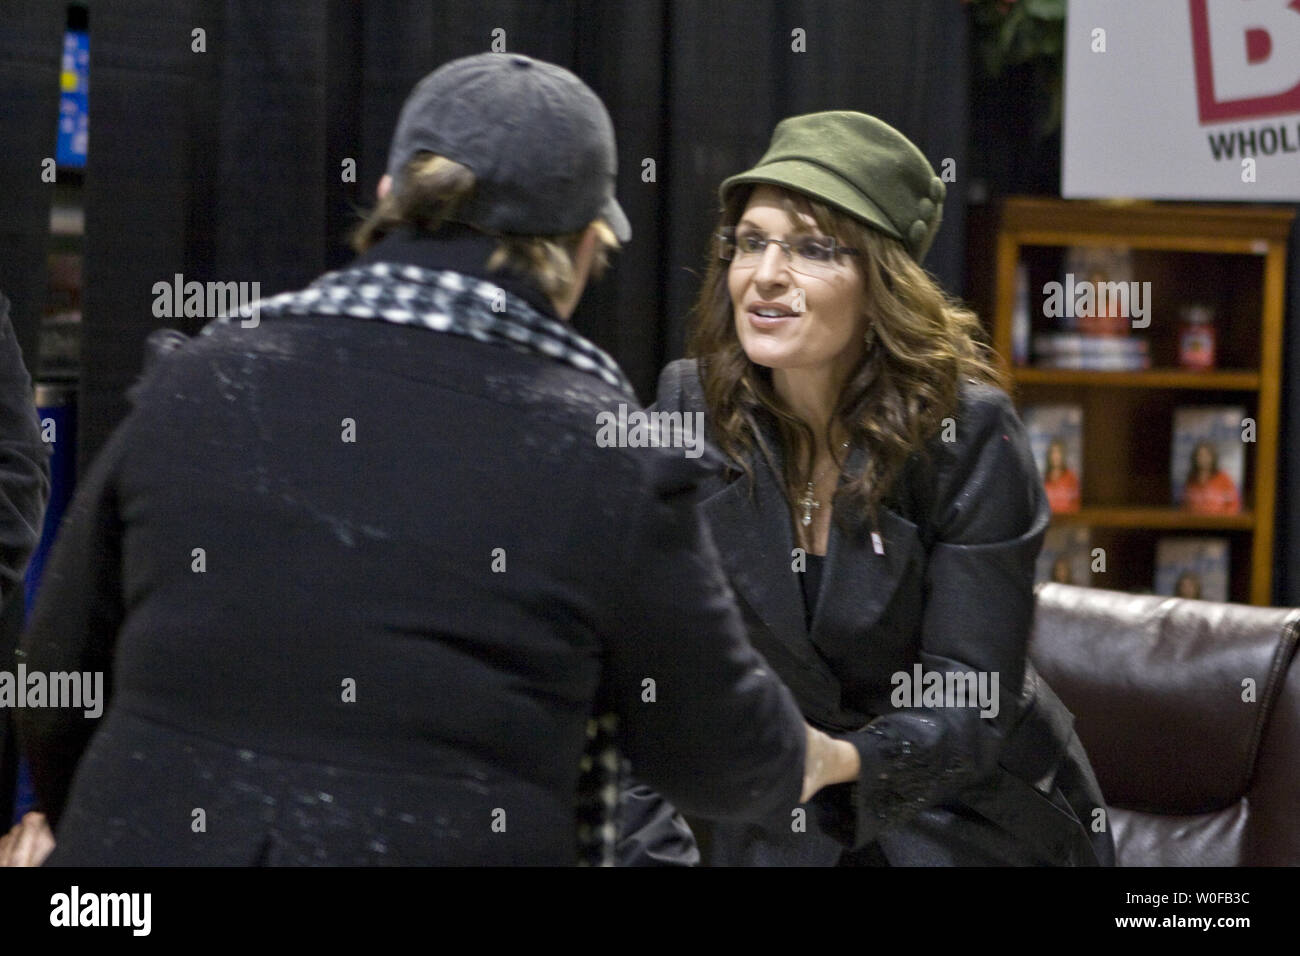 Sarah Palin meets with fans at a book signing tour for 'Going Rogue' at BJ's Wholesale Club in Fairfax, Virginia  on December 5, 2009.      UPI/Madeline Marshall Stock Photo